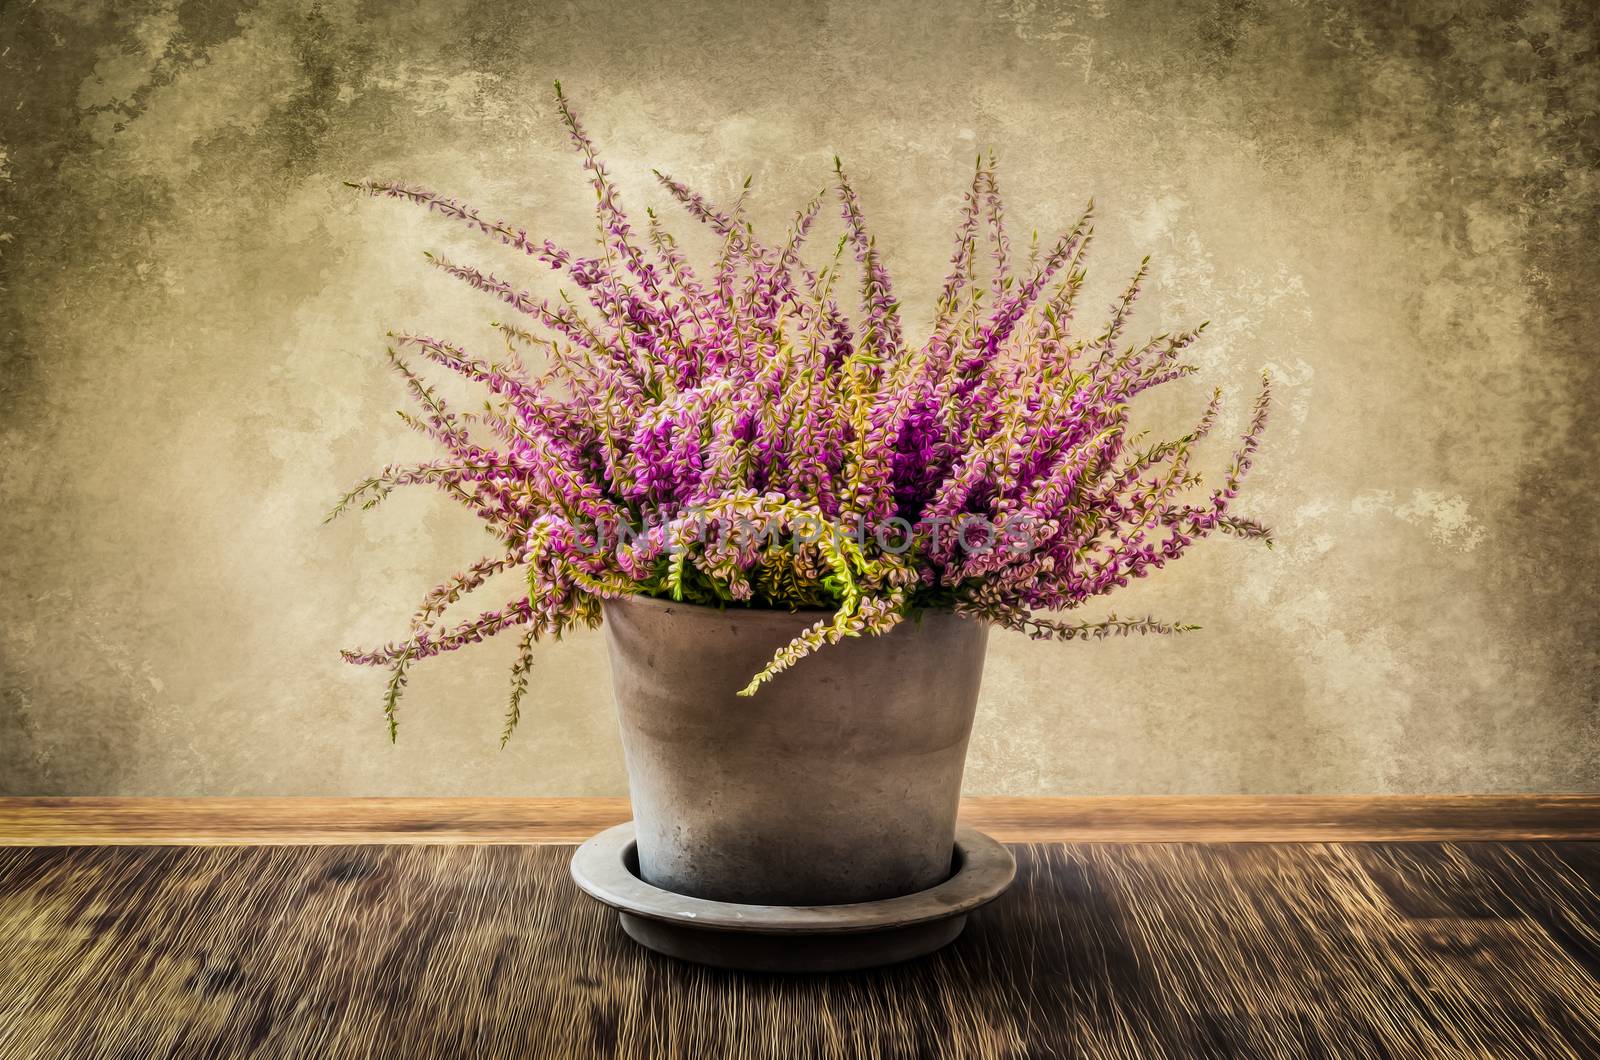 Post process painting of heather flower in pot with textured wall background, vintage style